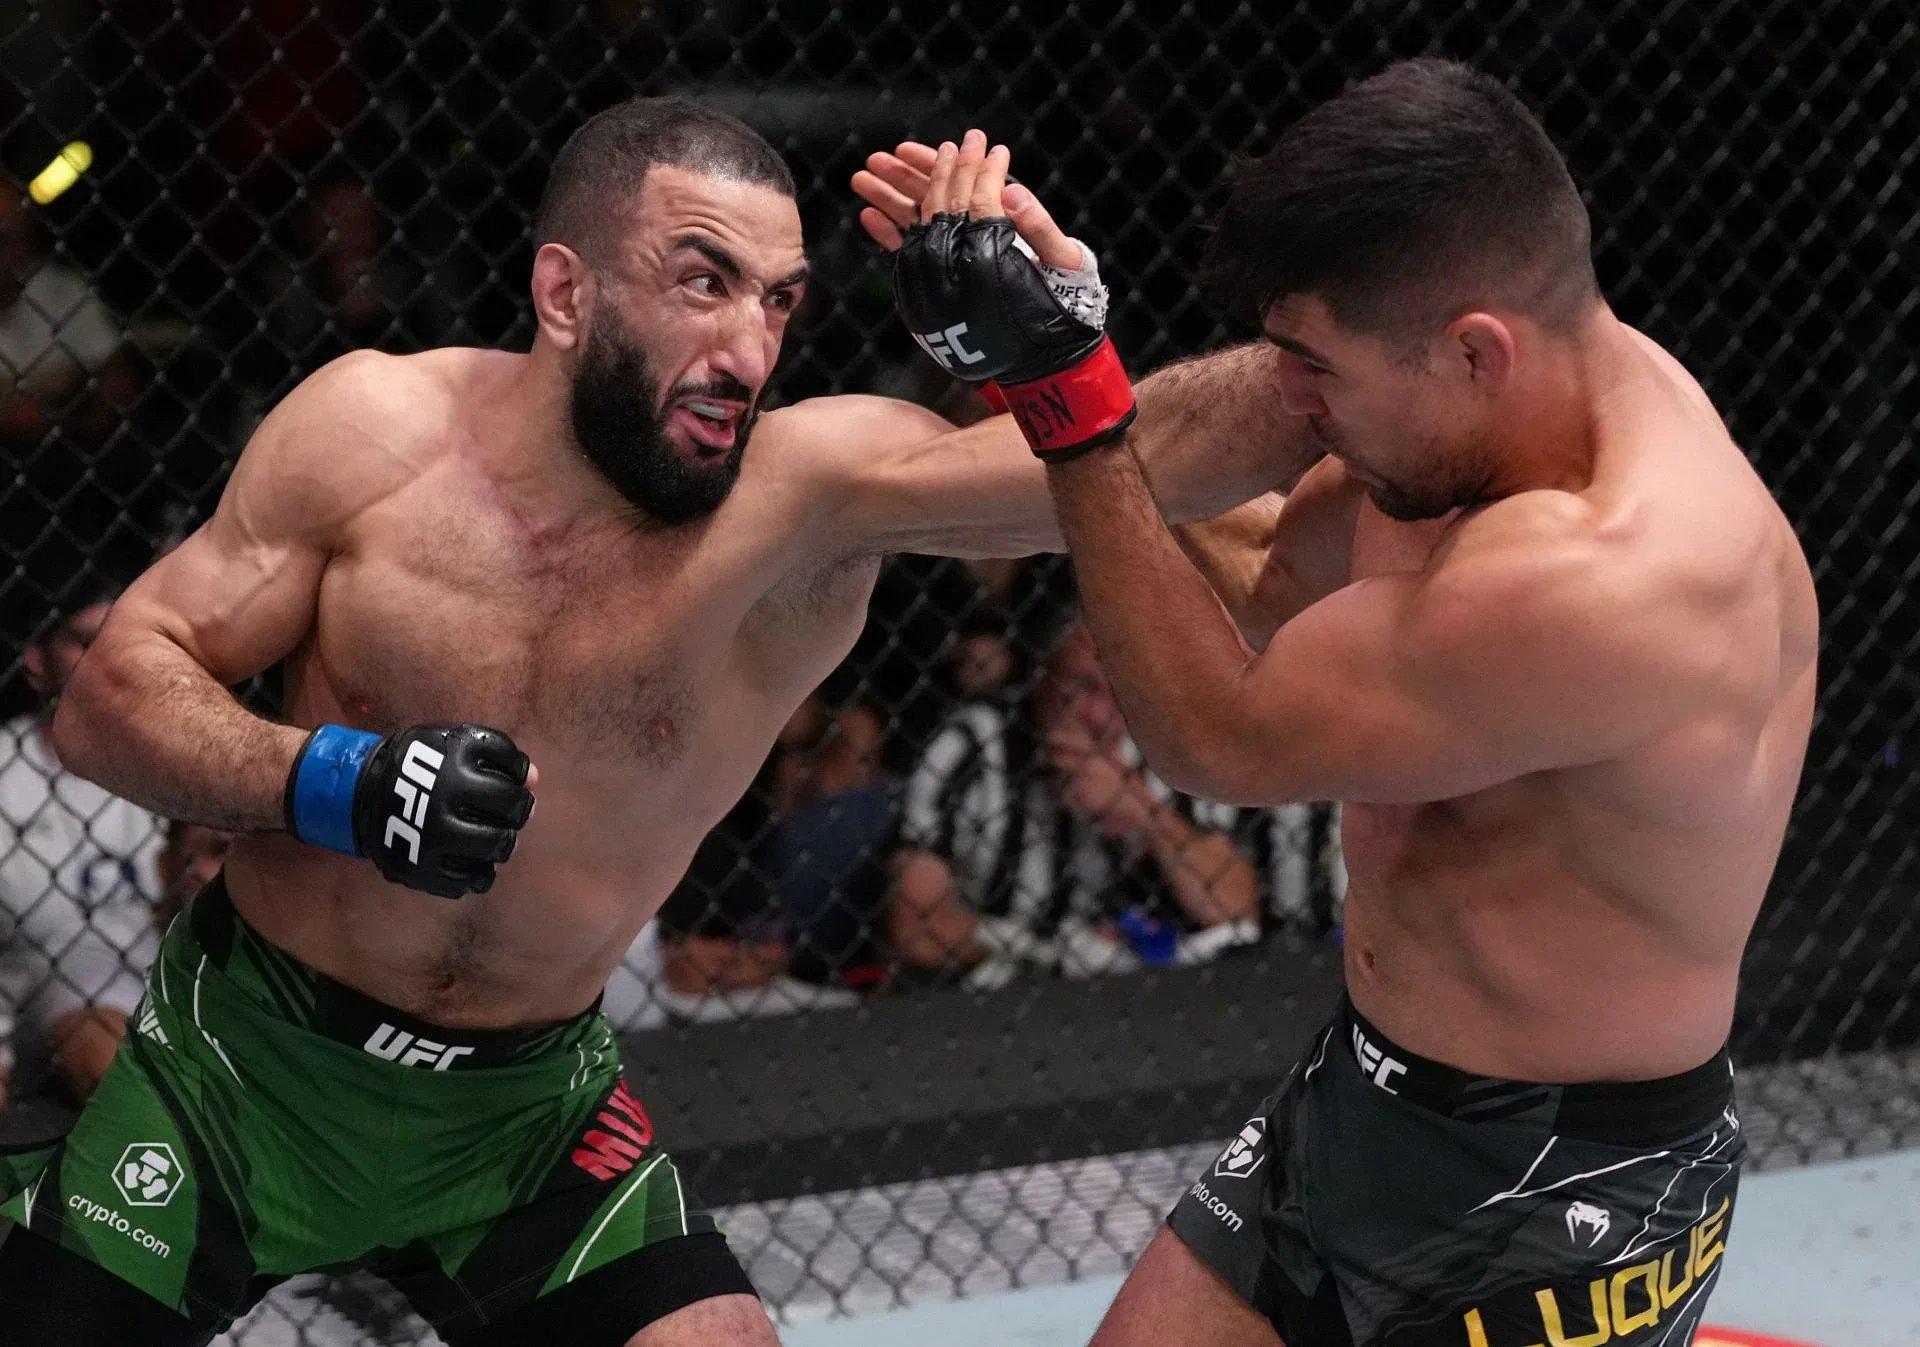 Belal Muhammad solidifies himself as a top welterweight